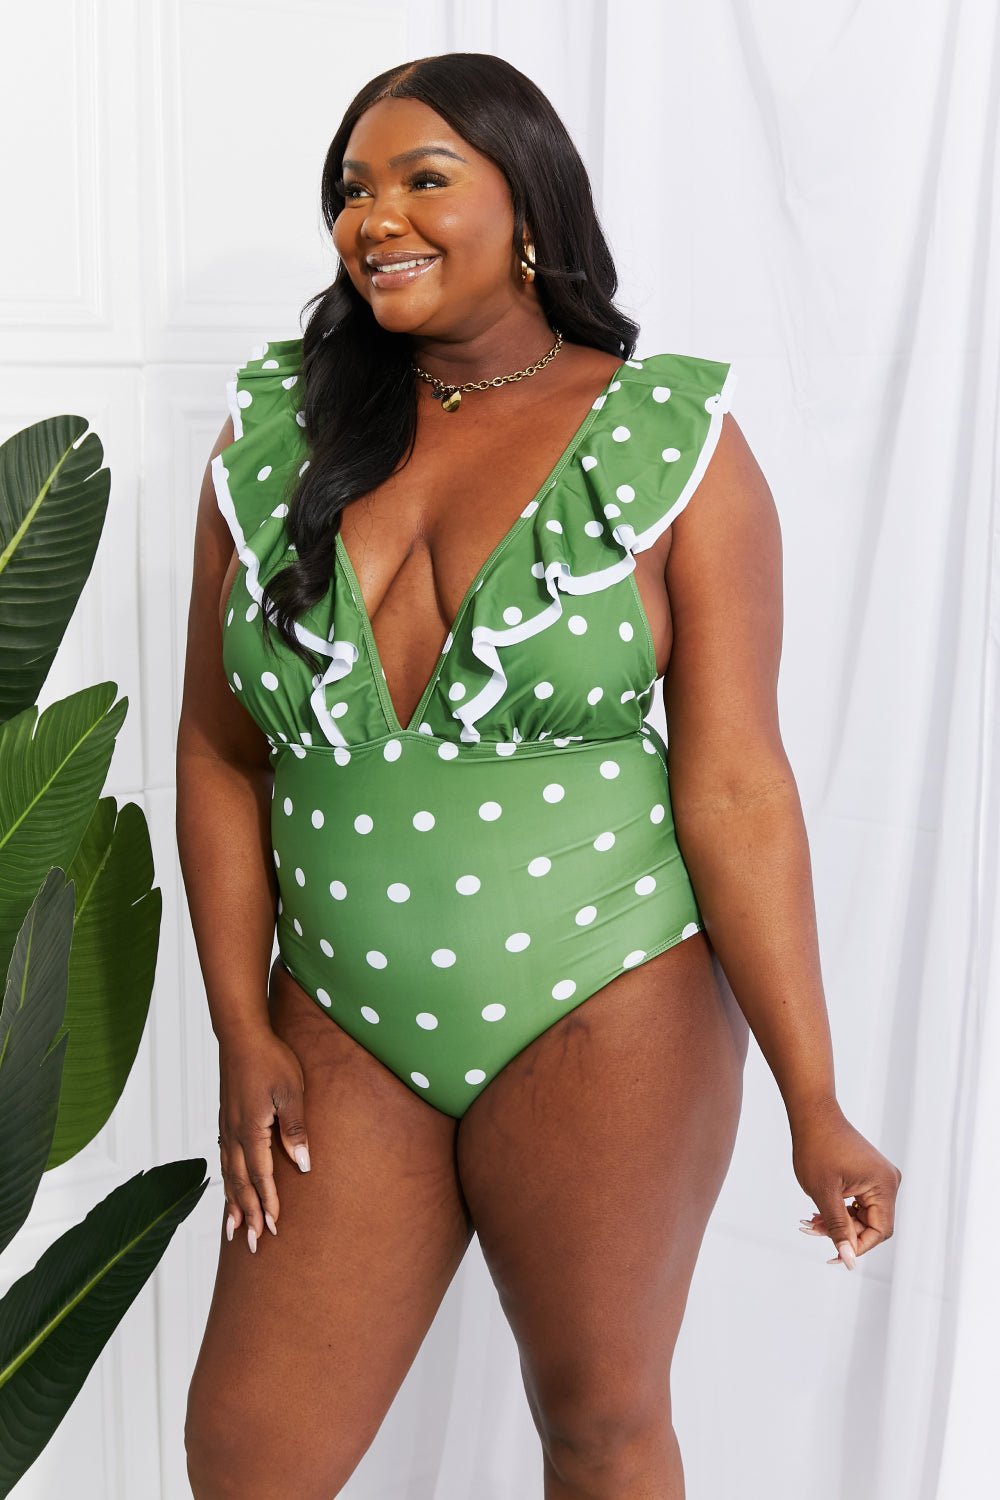 Marina West Swim Moonlit Dip Ruffle Plunge Swimsuit in Mid Green - Happily Ever Atchison Shop Co.